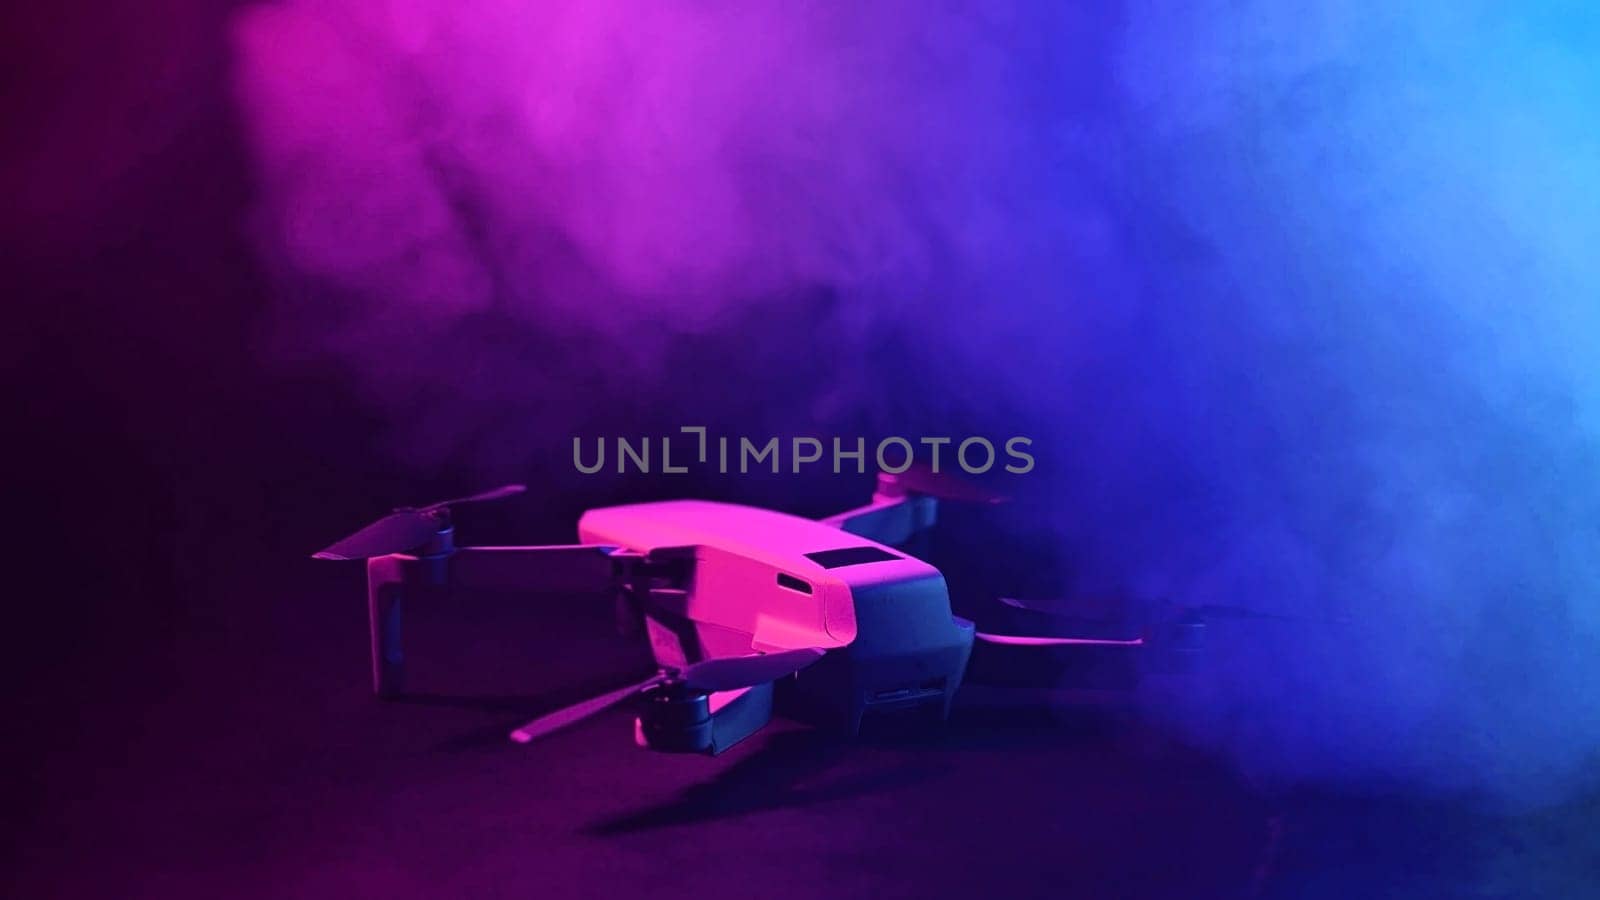 Quadrocopter in clouds of colored pink-blue smoke on a black background. by mrwed54